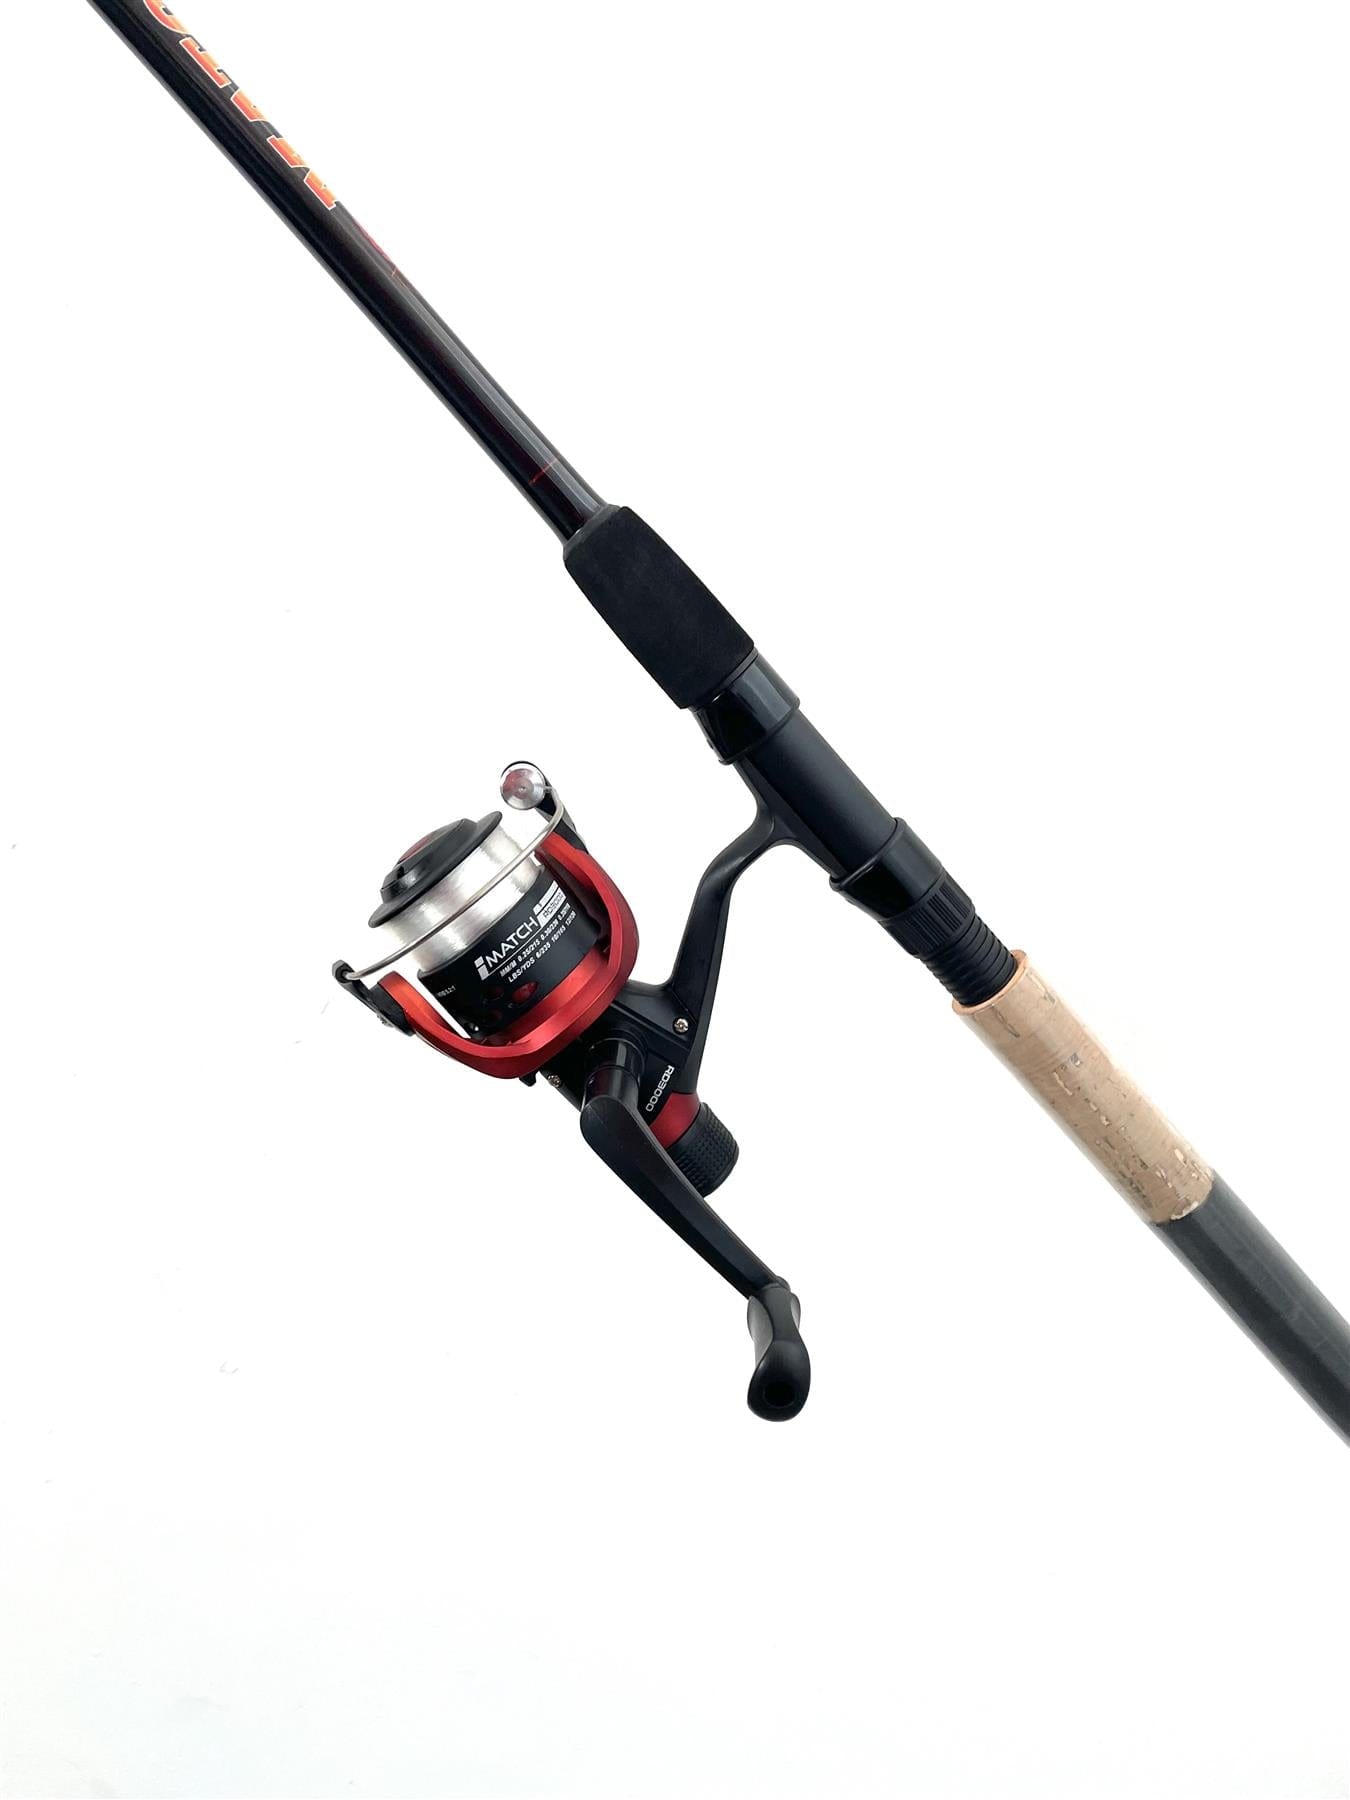 Shakespeare Firebird Tele Spin Combo Rod and Reel with Line - 8ft - 15 -  Rods and Lines